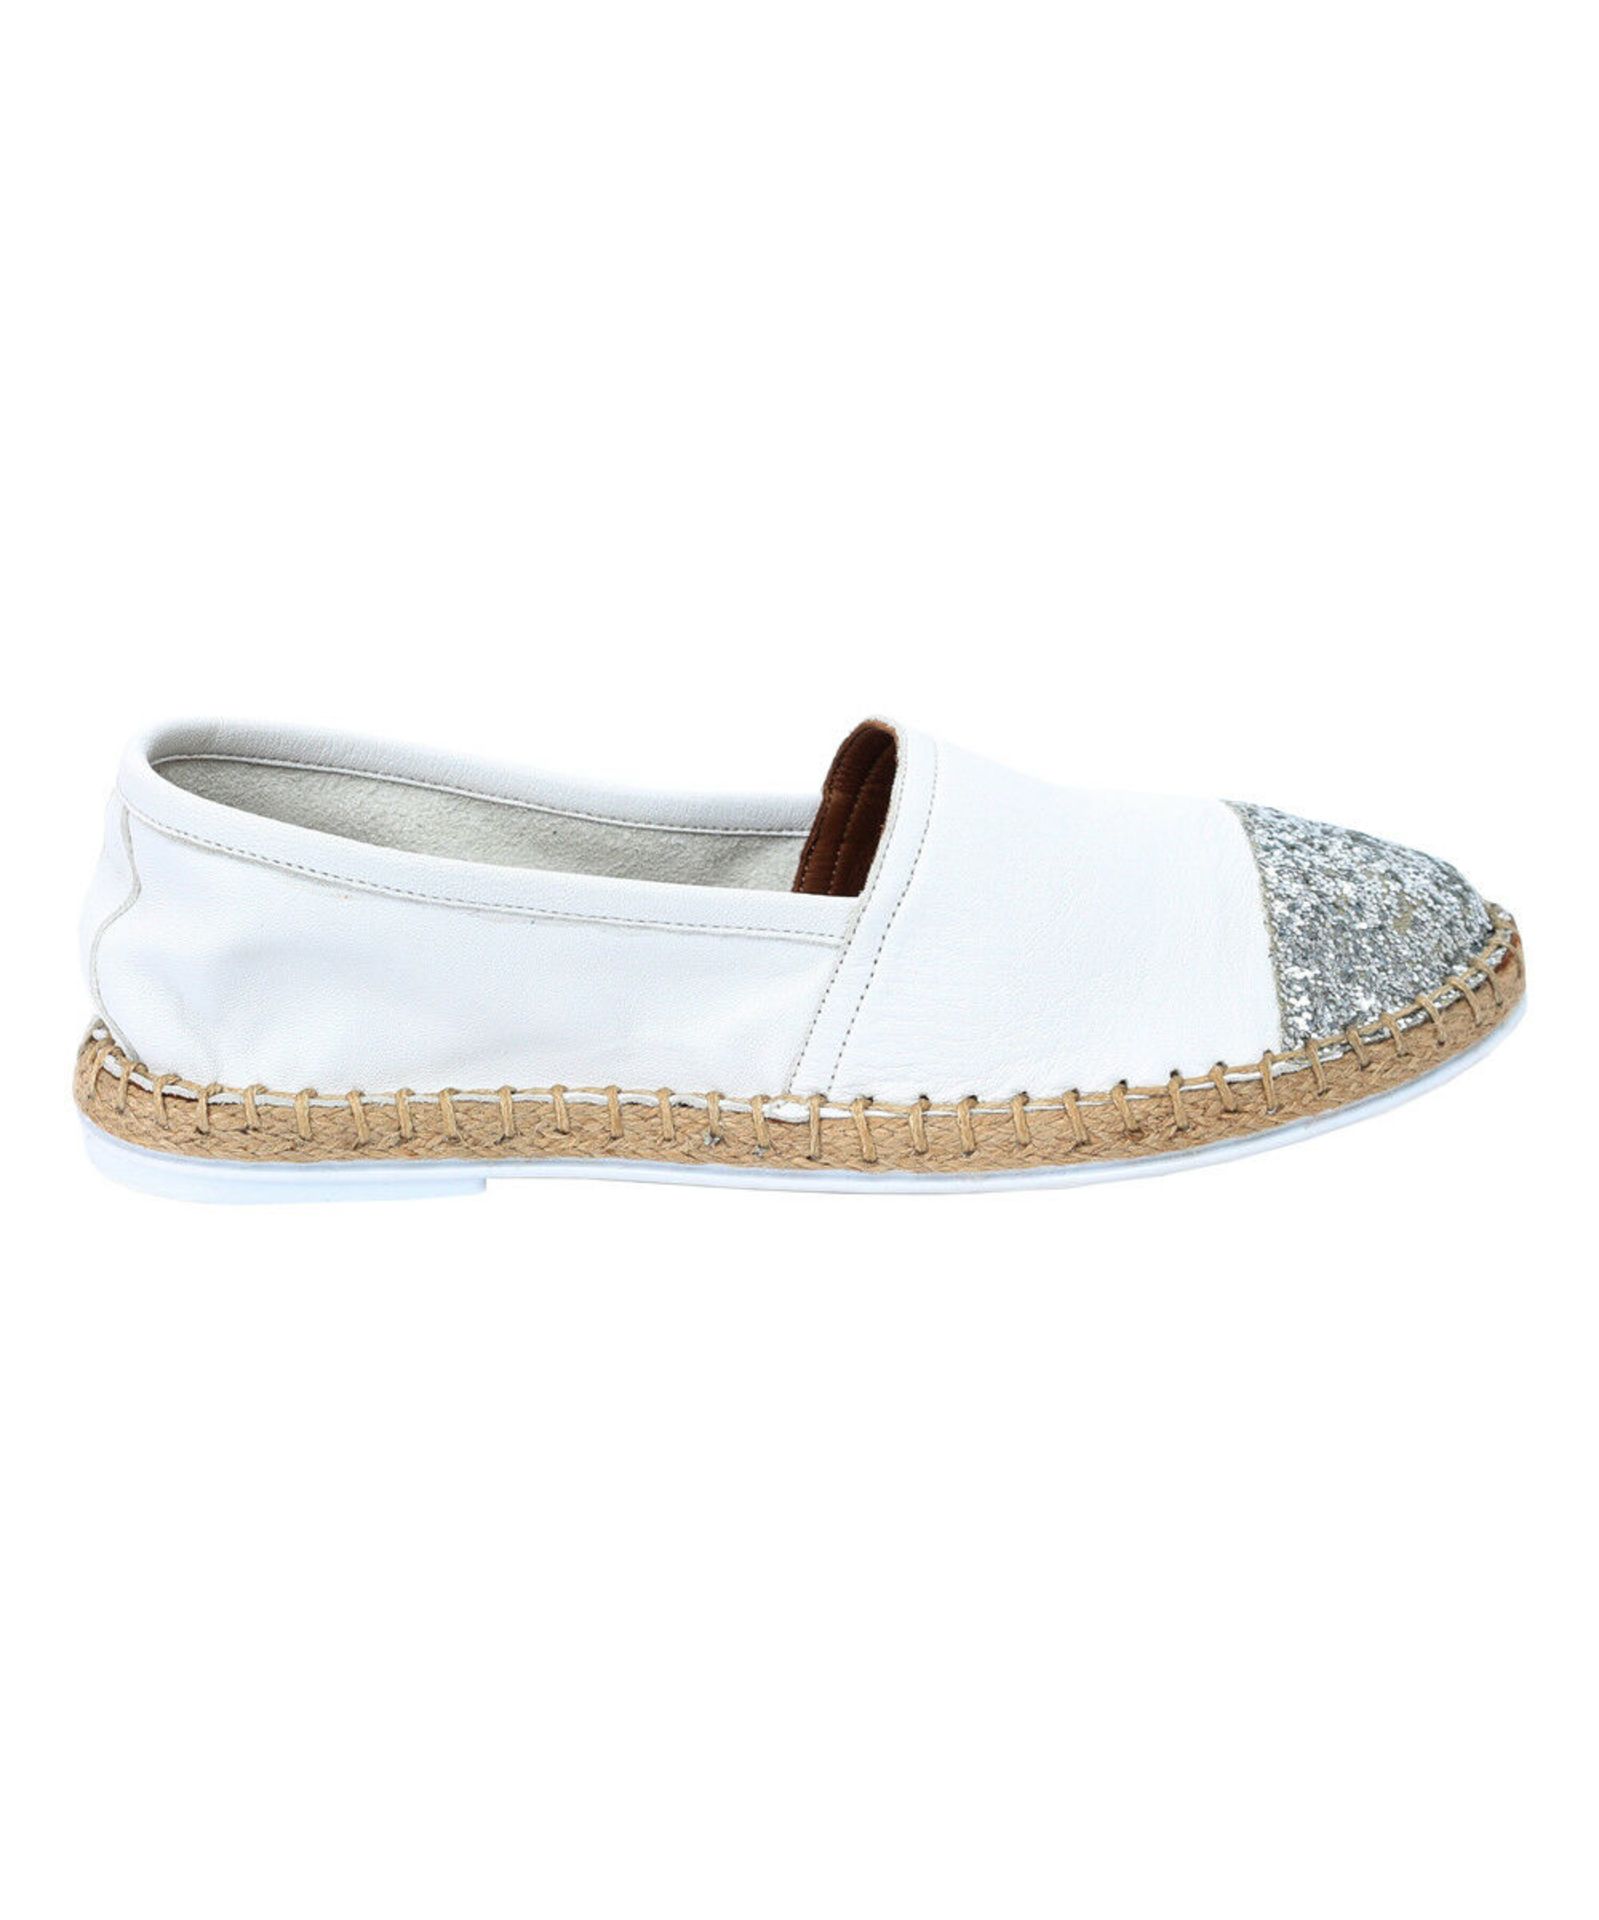 Bogy, White Leather Loafer - Women, Size Eur 40 Uk 7 (New With Box) [Ref: 45405062 -G-004]